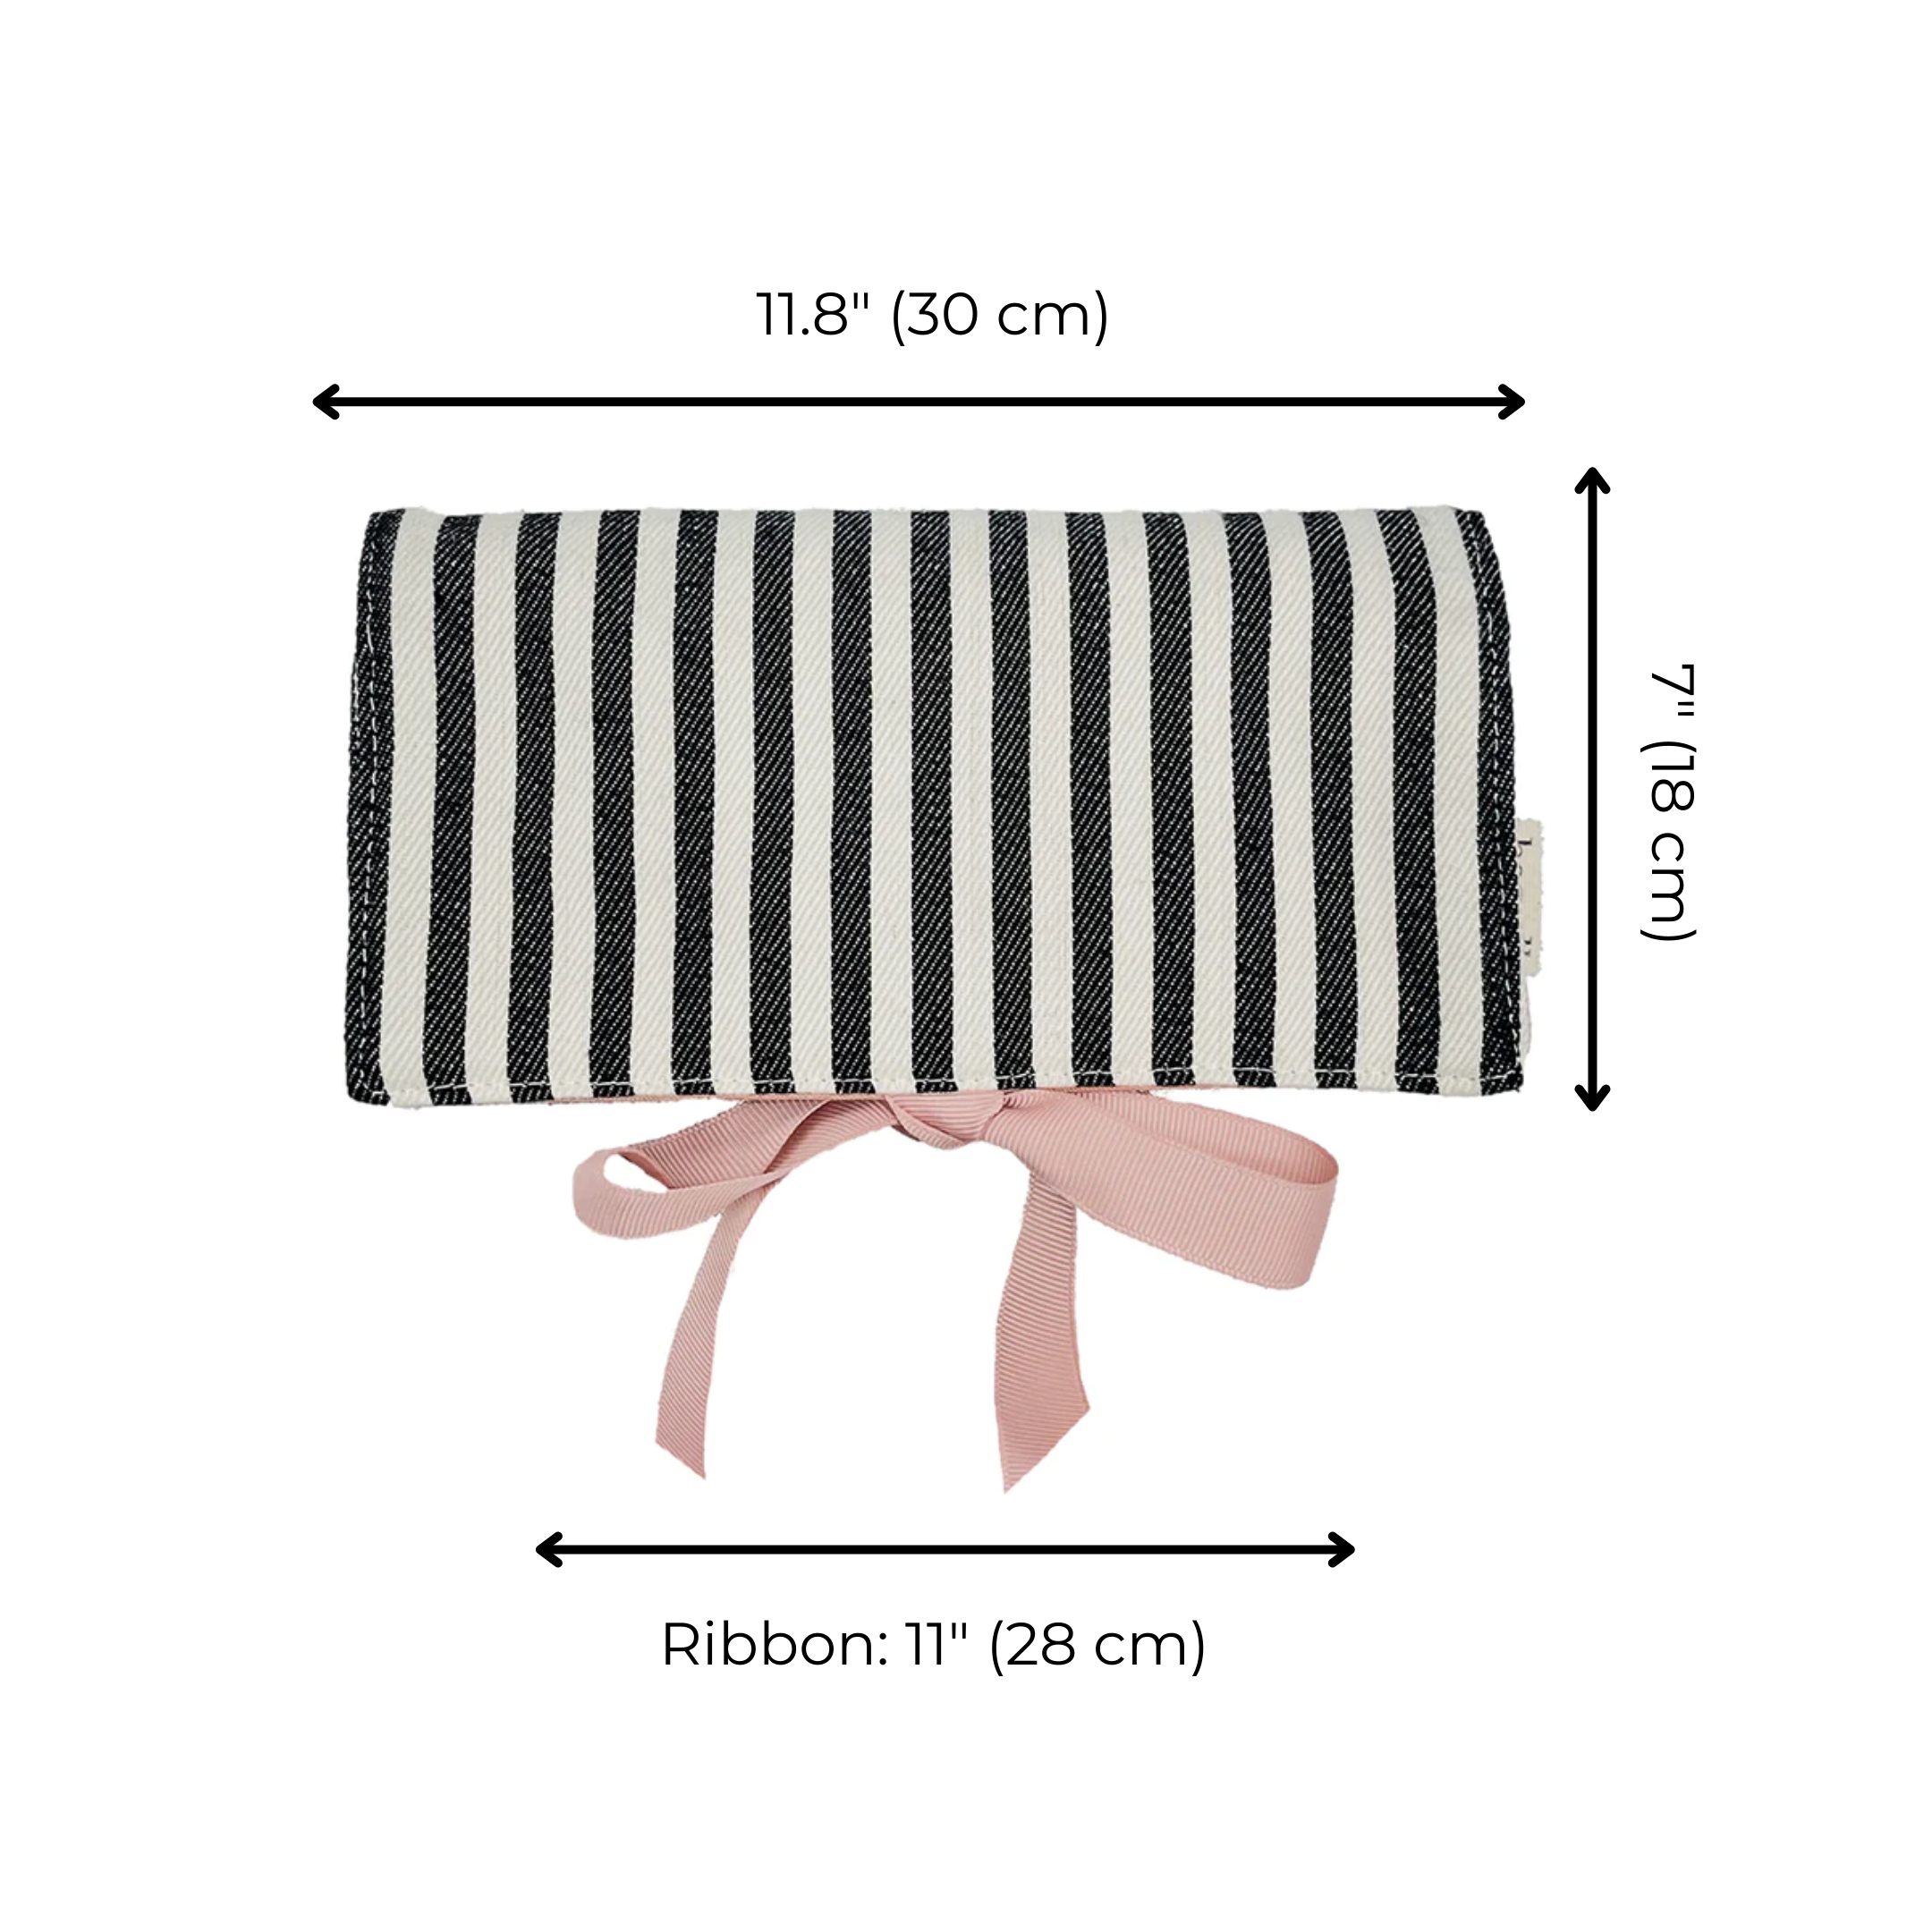 Jewelry Roll, Travel Pouch, Striped | Bag-all